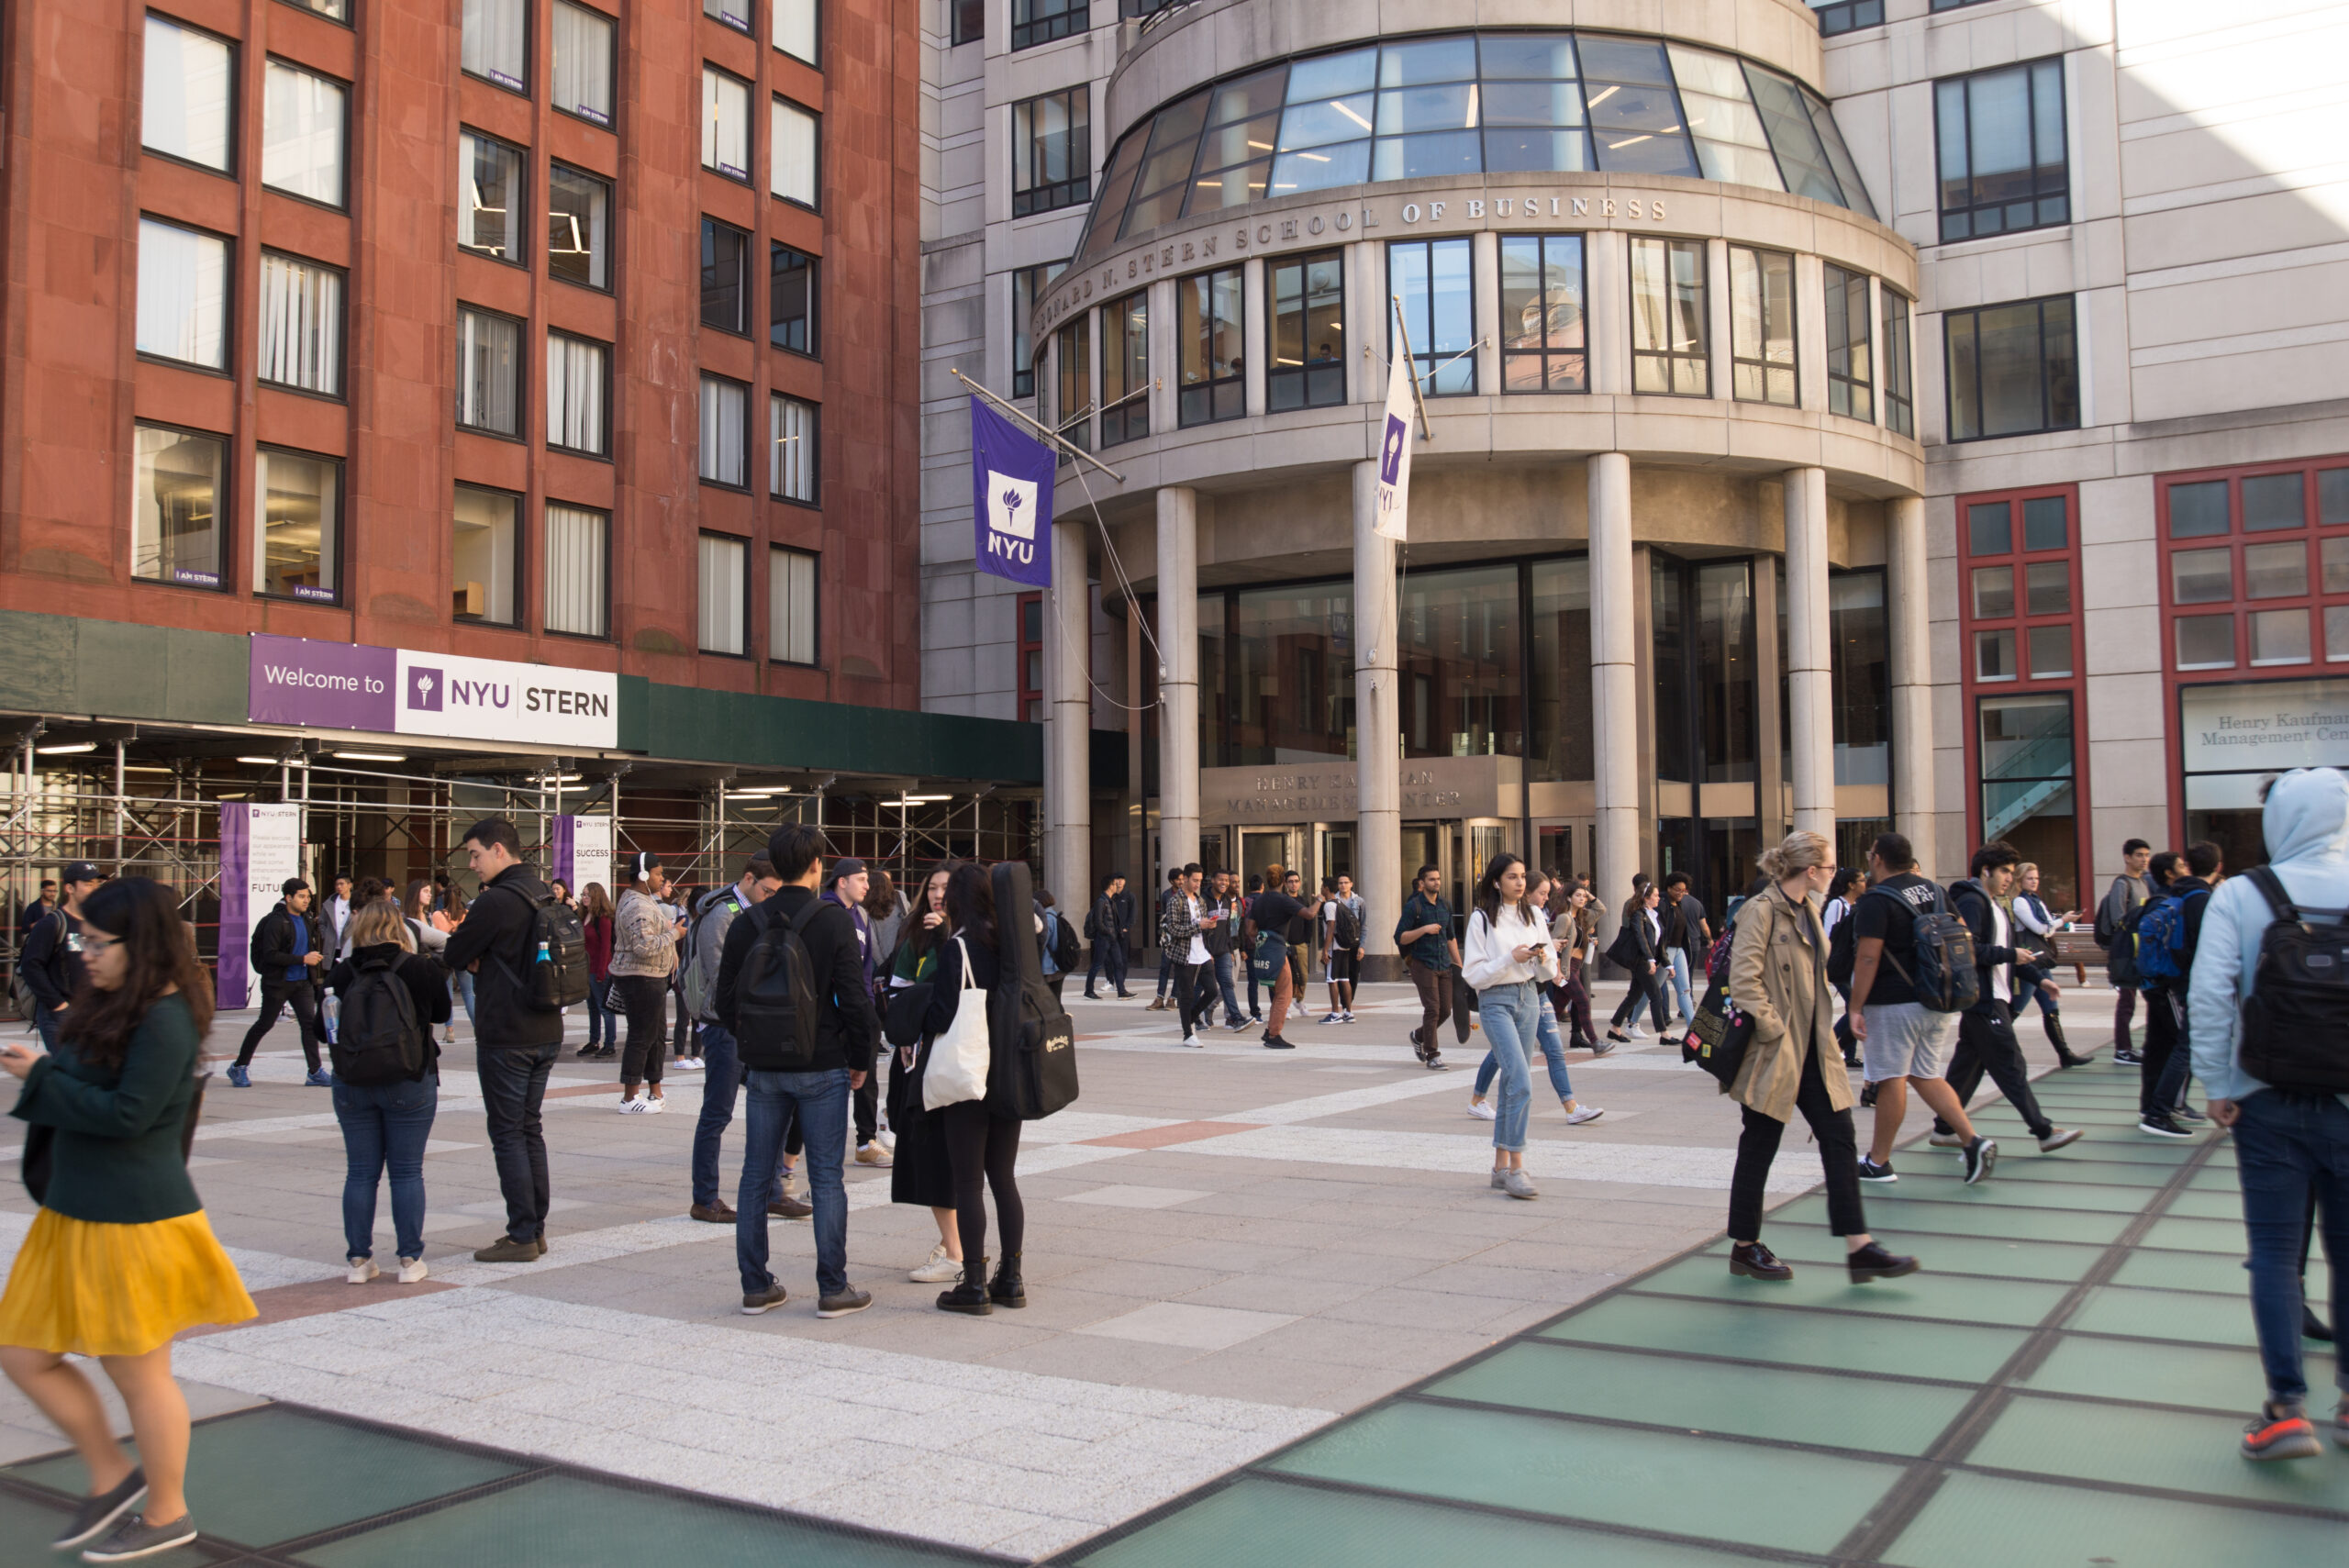 Students walking in the concourse outside the NYU's Stern School of Business building.